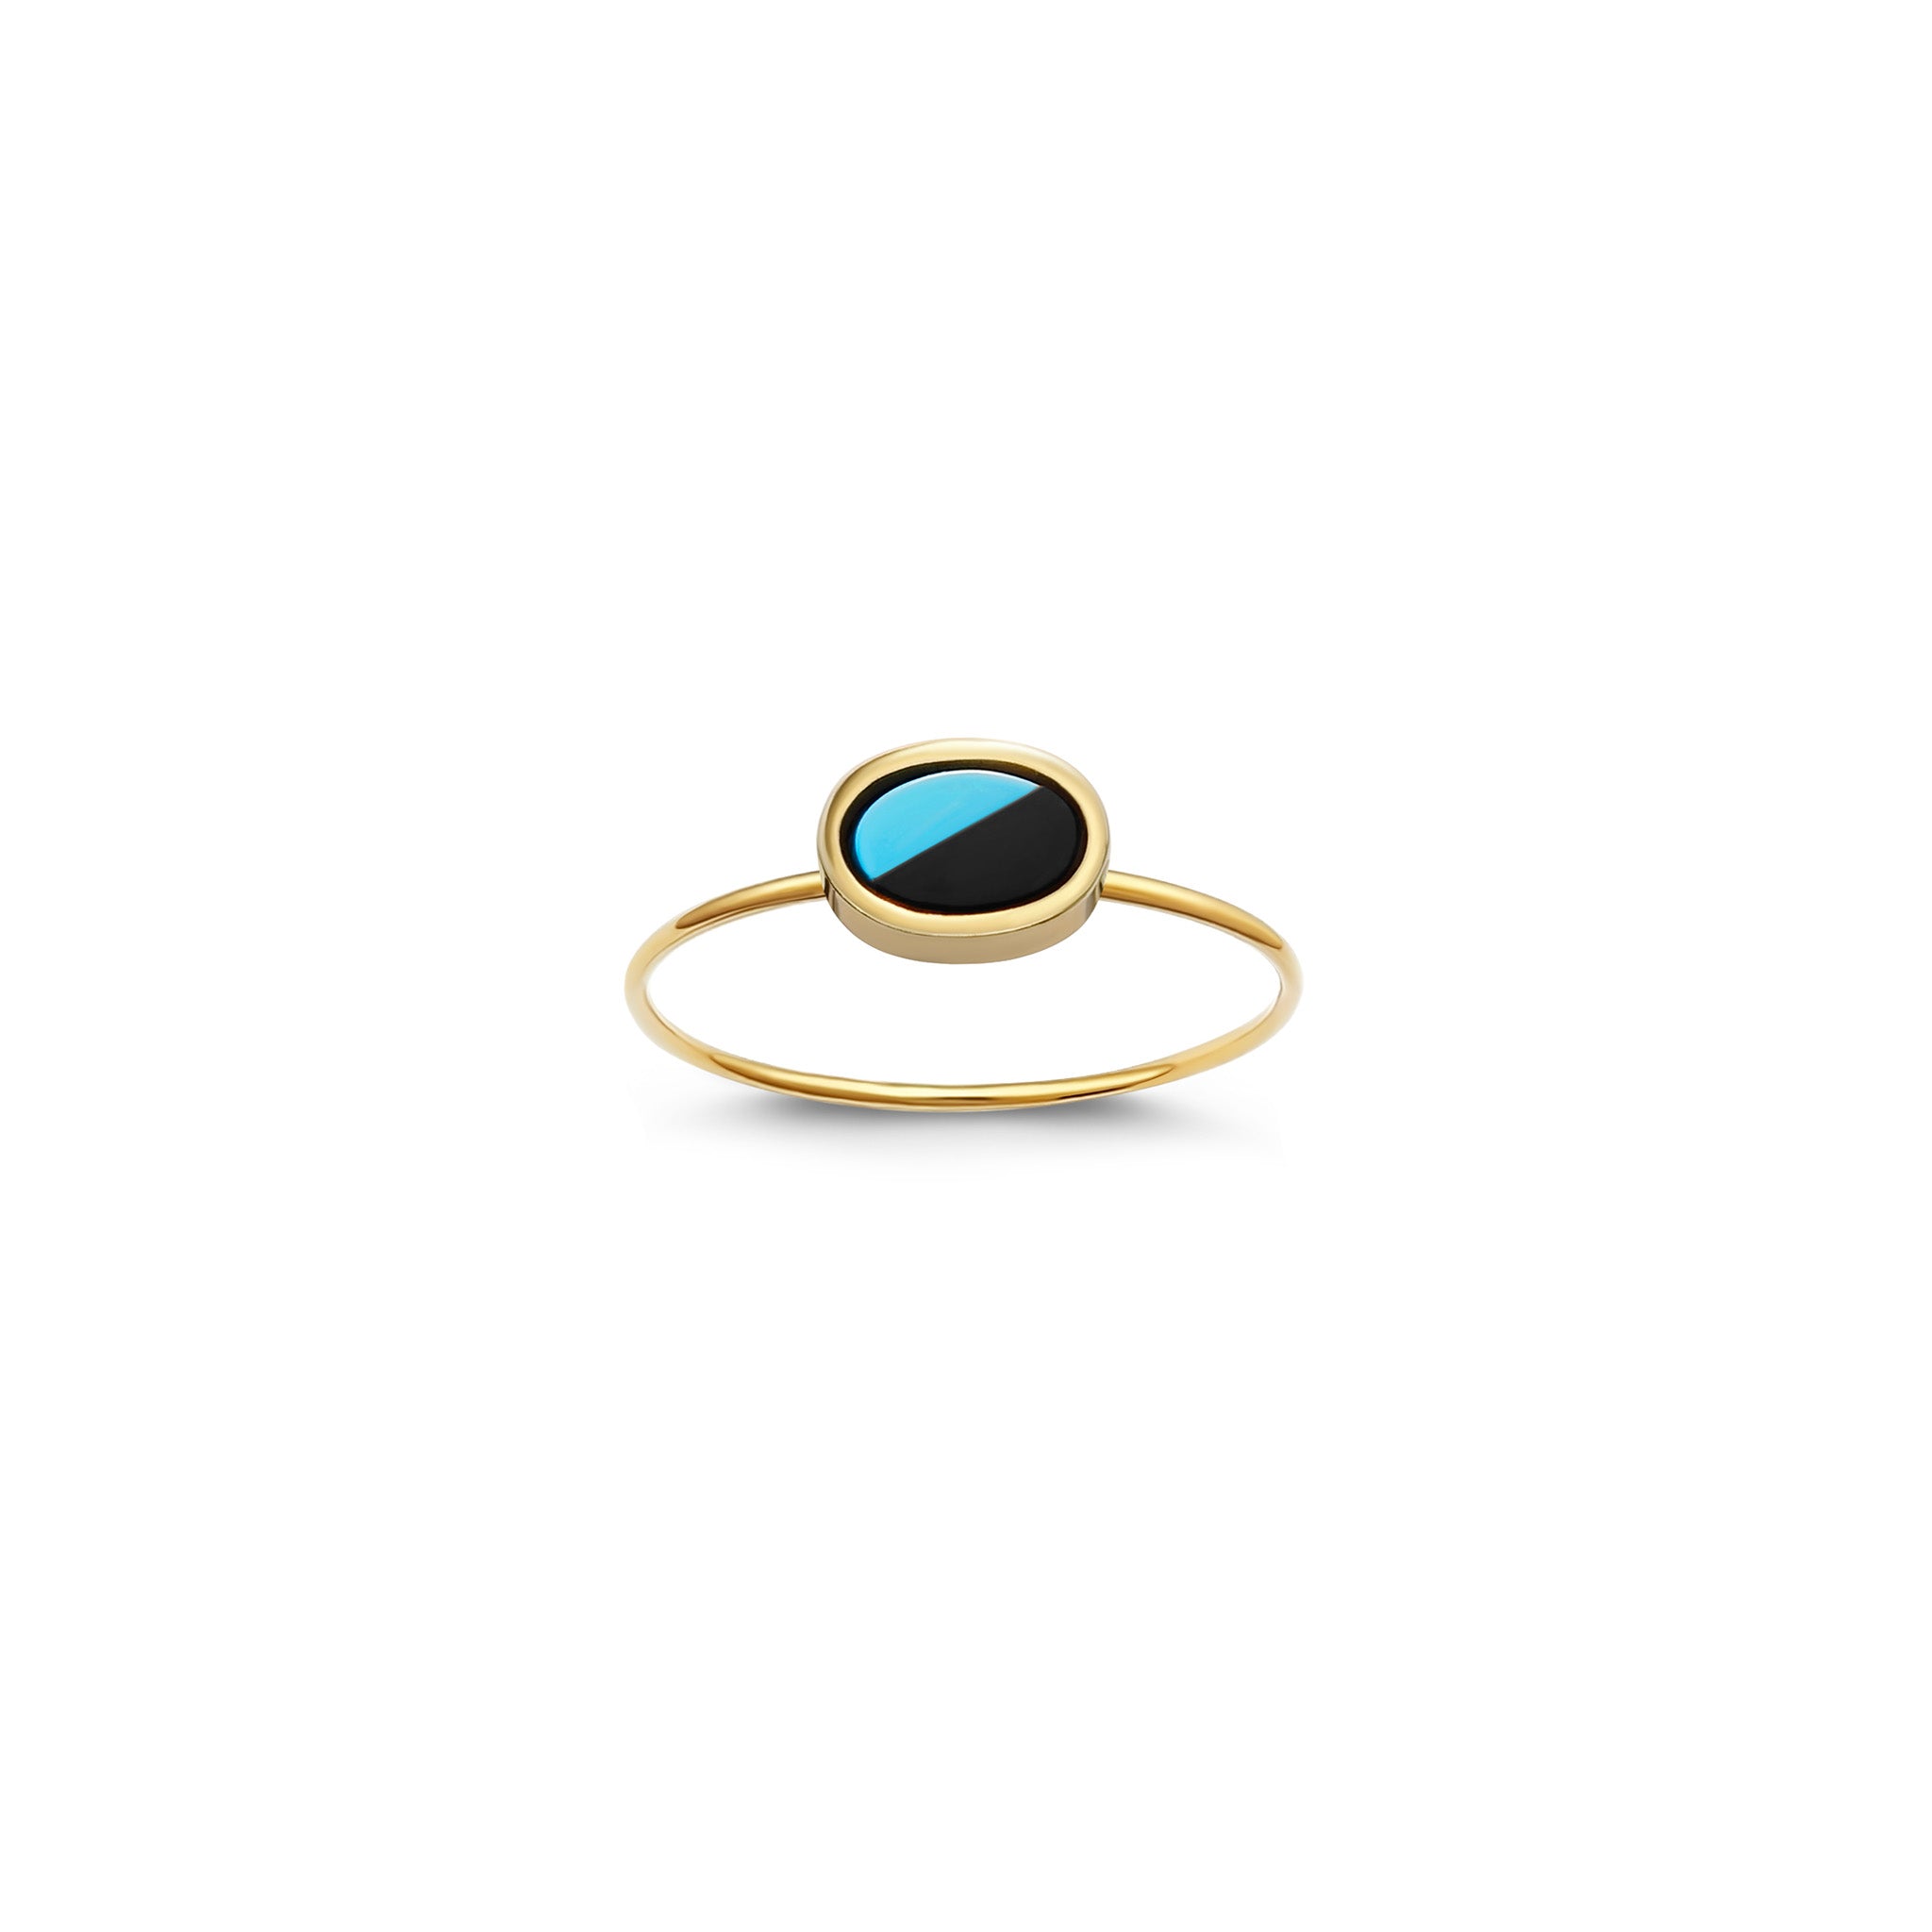 Opulent Materials: Fashioned from the finest 19.2K Gold and Onyx, this ring exudes an air of sophistication and luxury. The inclusion of a mesmerizing Nacre inlay adds a touch of ethereal beauty.